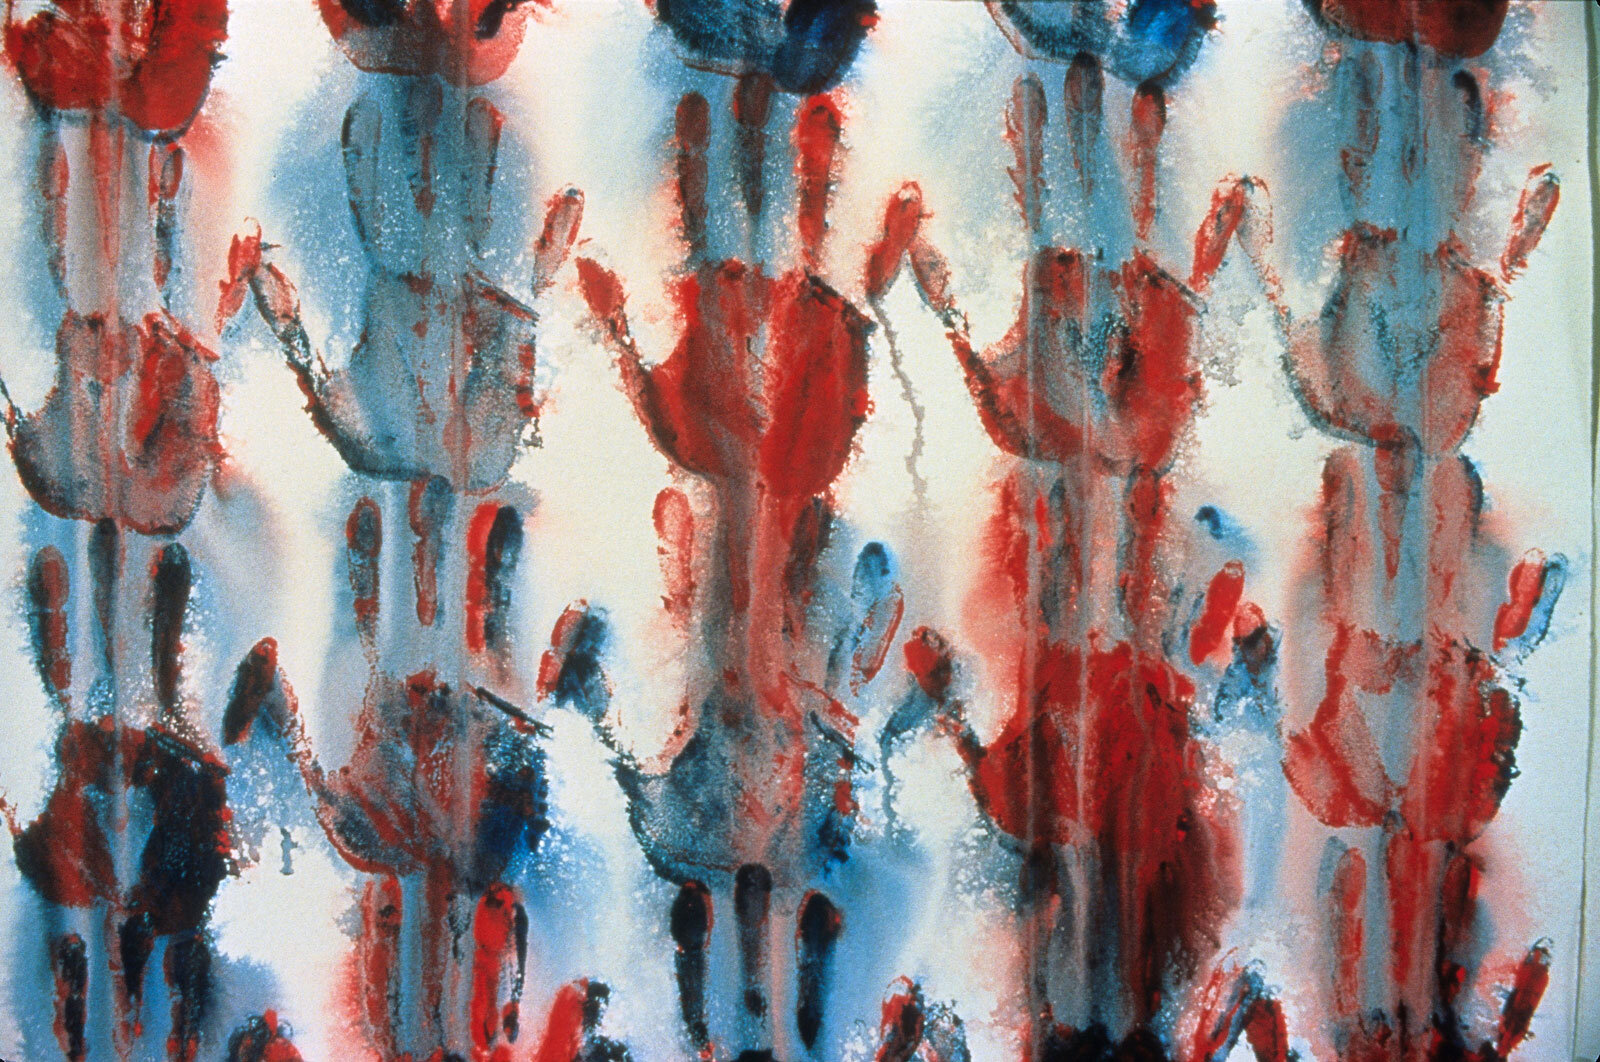   280 Hands  (detail), 1994, acrylic on paper, 41 x 26 inches 